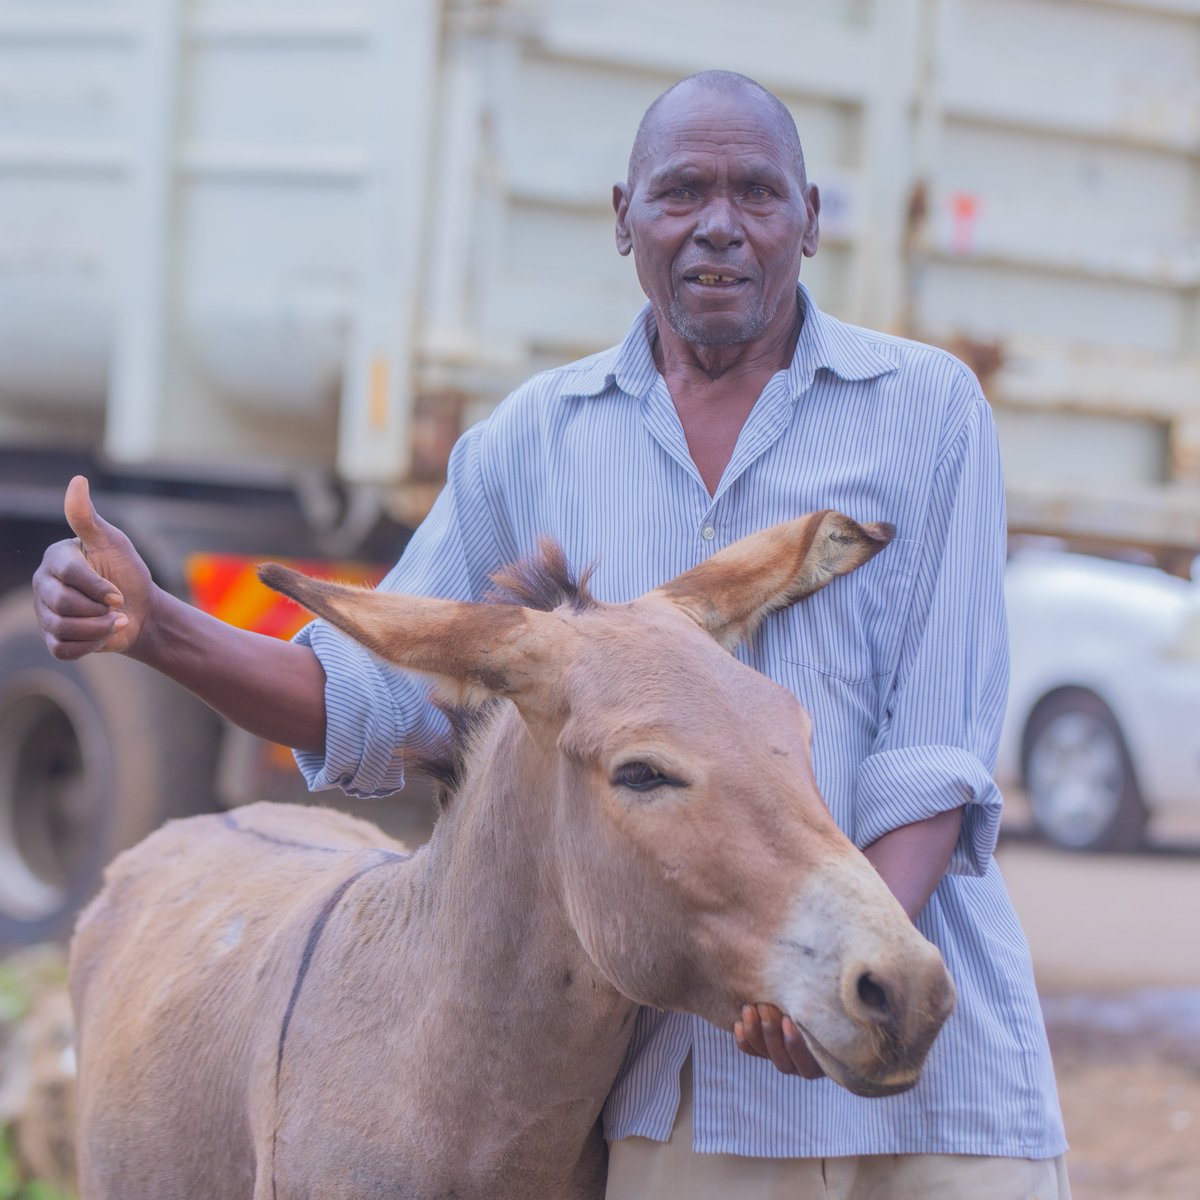 Meet Simon, one of the most seasoned donkey users we've encountered. Simon works with youths using donkeys in Kiserian, Kenya. He's been an integral part of their transformative journey, alongside @TheBrookeEA   and Lifeskills promoters.

🧵 Thread...